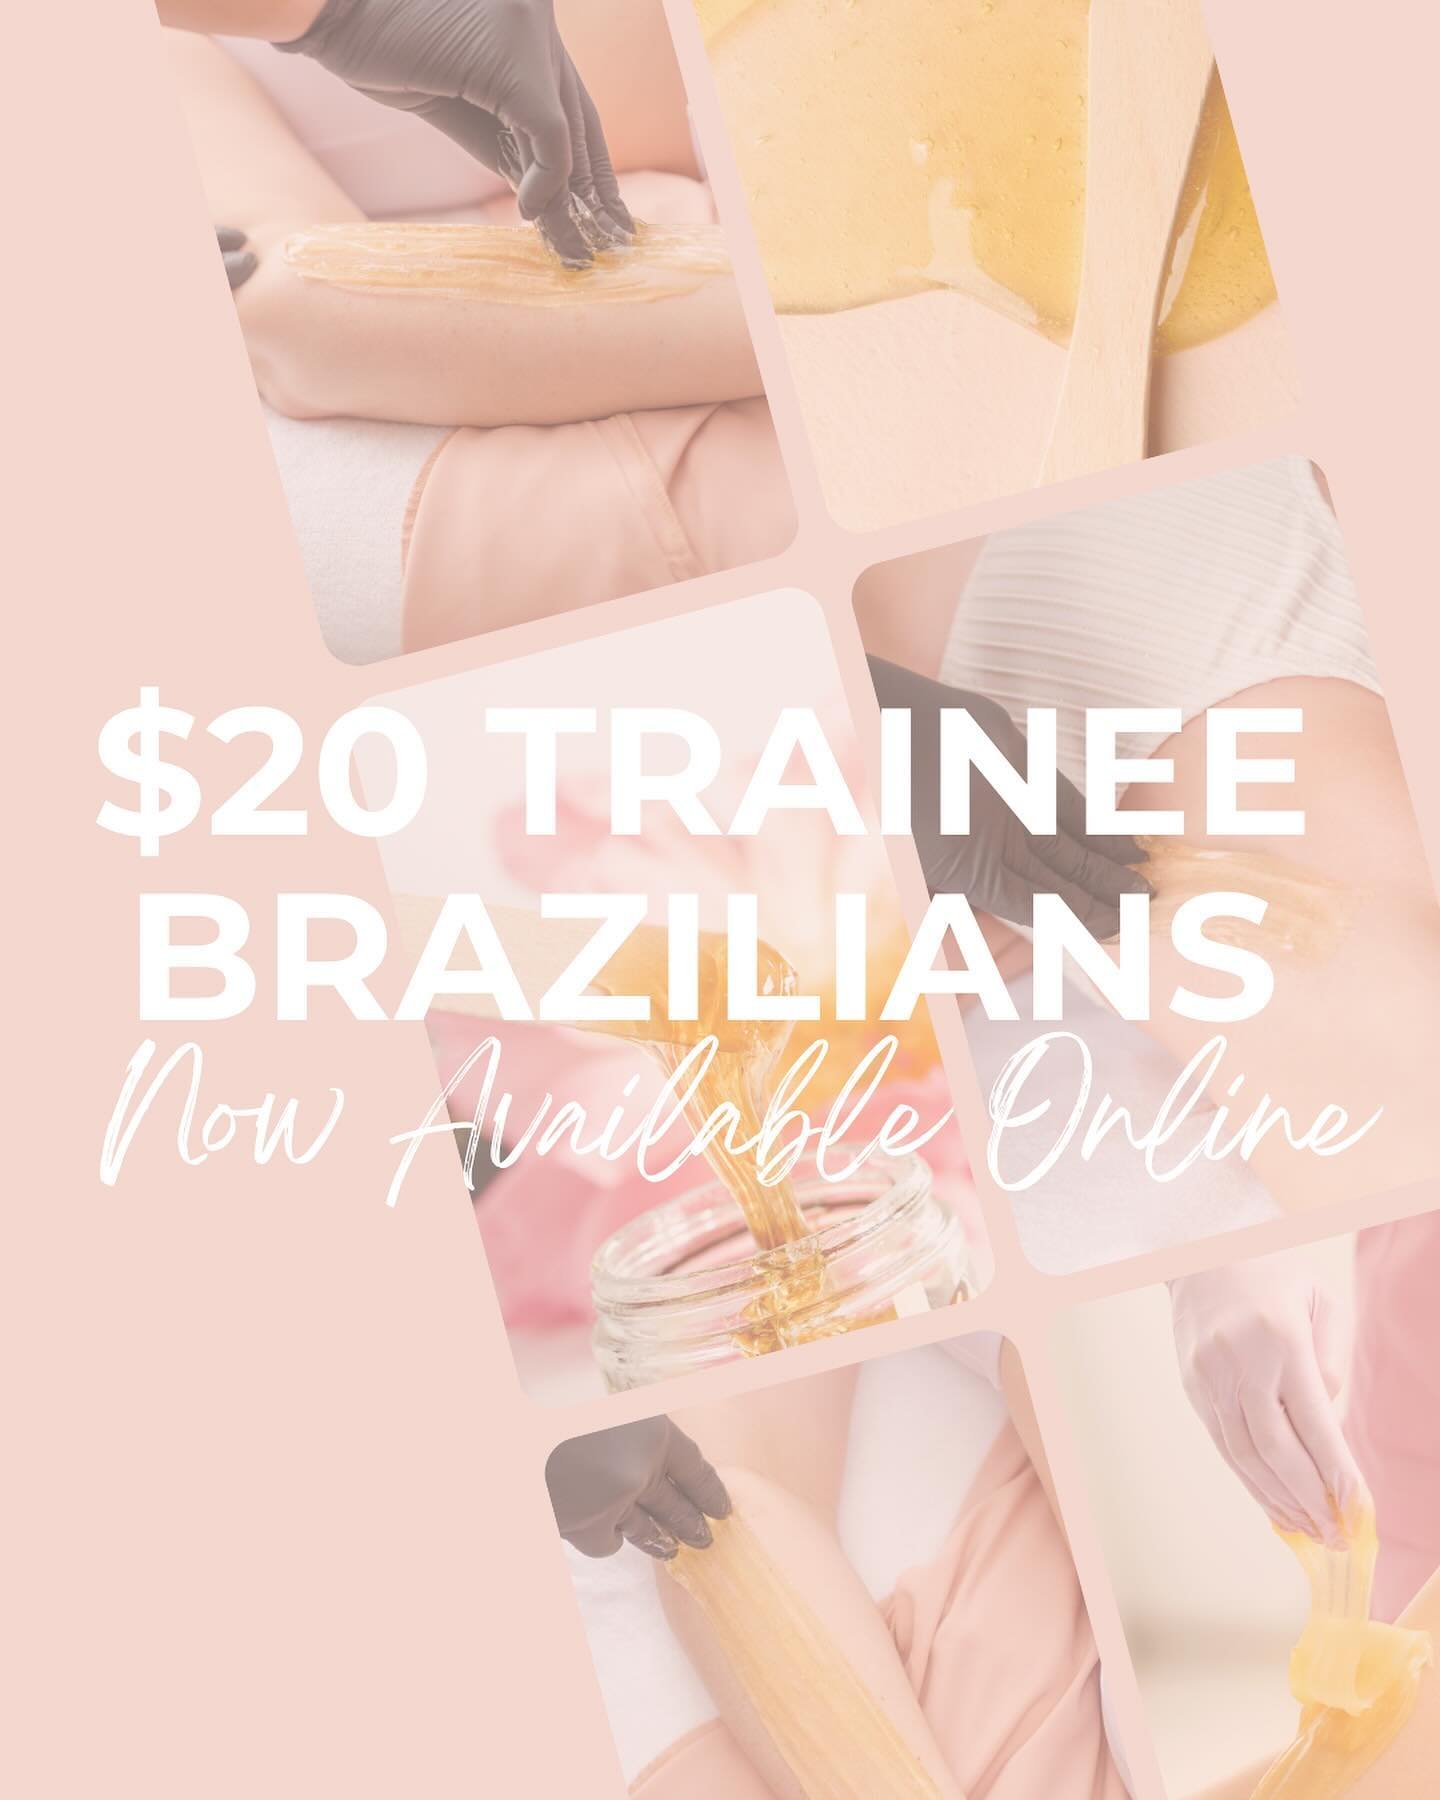 With a new sugarista on the team comes TRAINEE BRAZILIANS! Refer your friends who haven&rsquo;t been to us yet and receive $10 in referral credits. Book your $20 Trainee Brazilian online now! 💖

IMPORTANT REMINDER: Coming from shaving, hair must be 